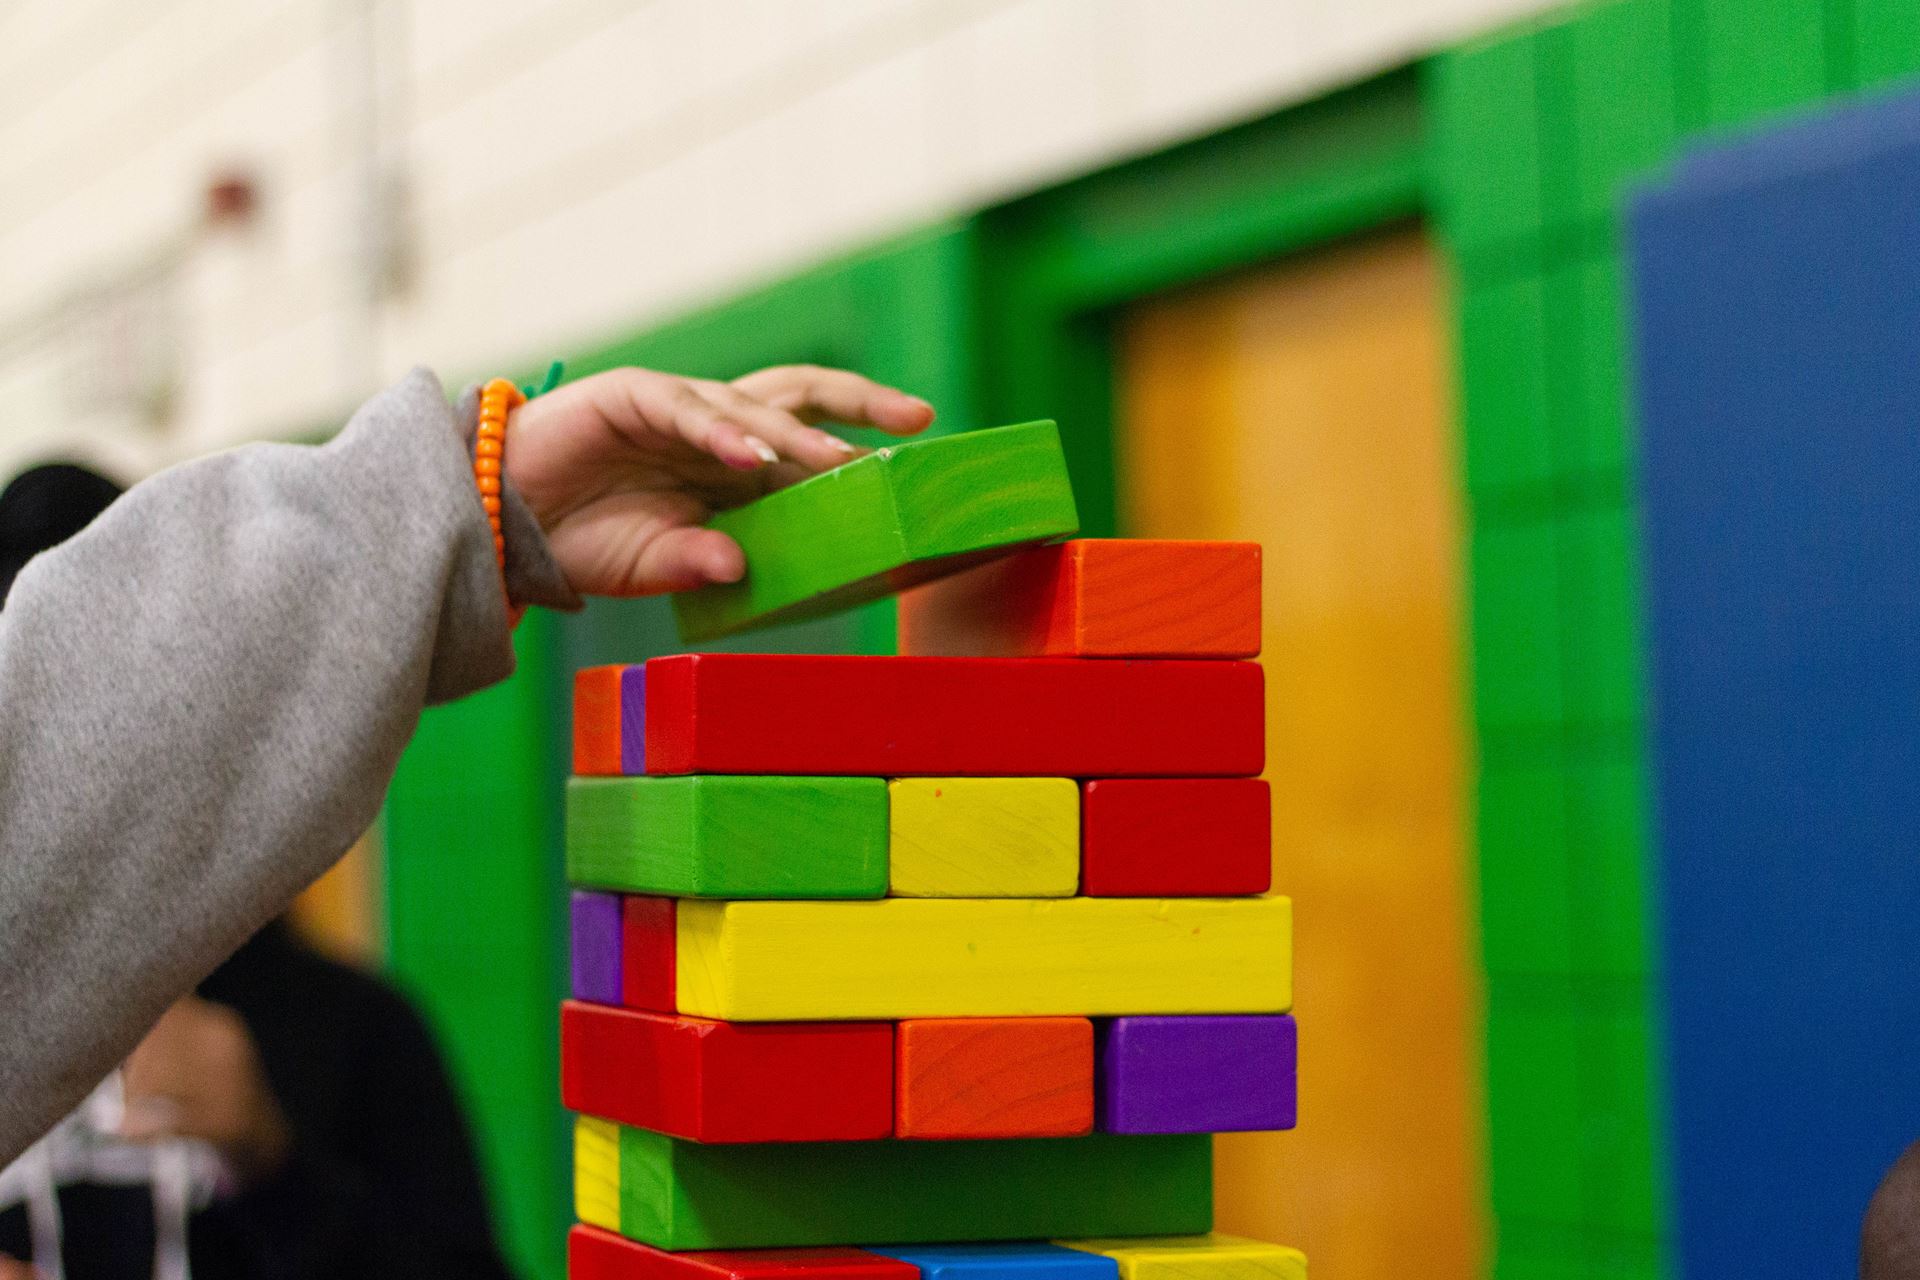 A child's hand lifting a jenga block onto the top of a tower